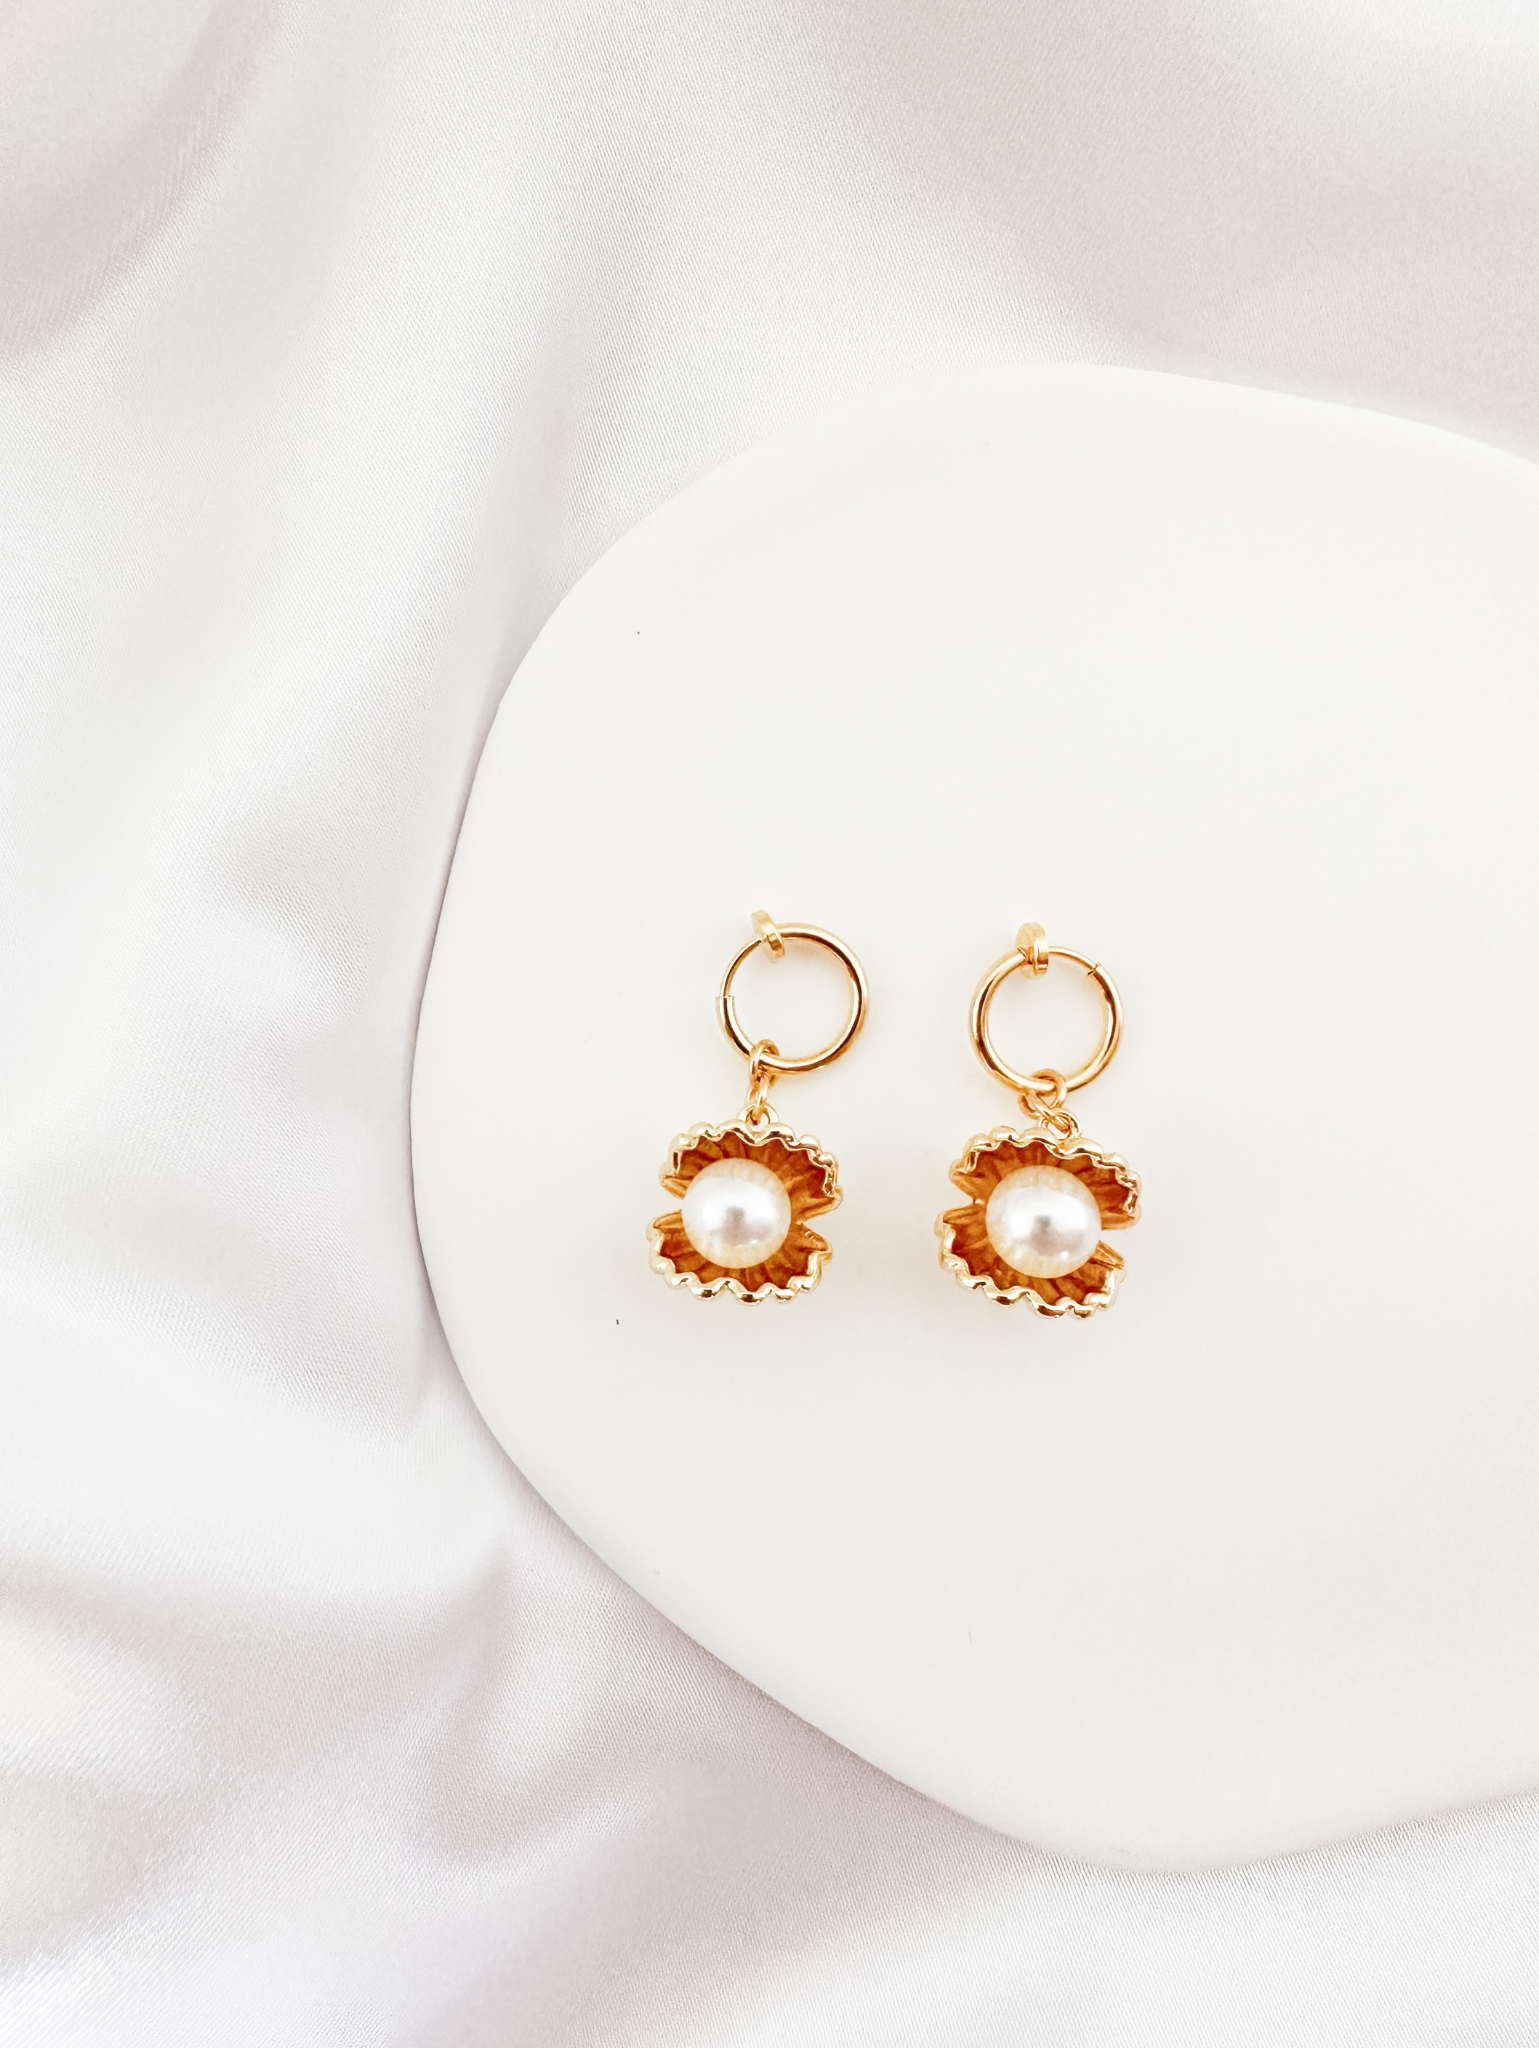 A pair of elegant gold-tone clip-on earrings with a scalloped, flower-like setting showcasing a central white pearl, presented on a white surface.